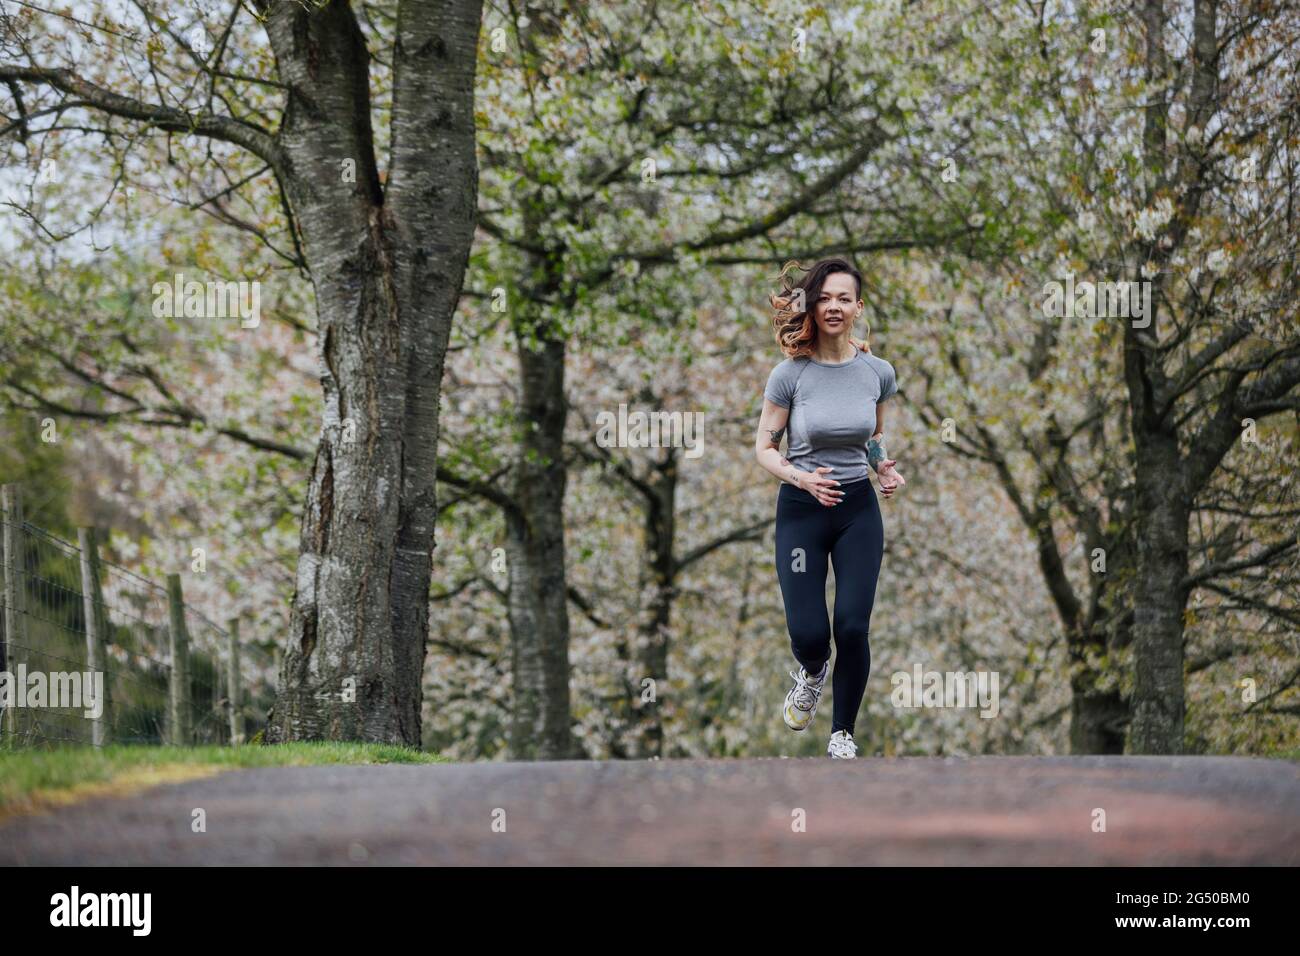 A young woman wearing gymwear, she is jogging in the park, under blossom trees. Stock Photo